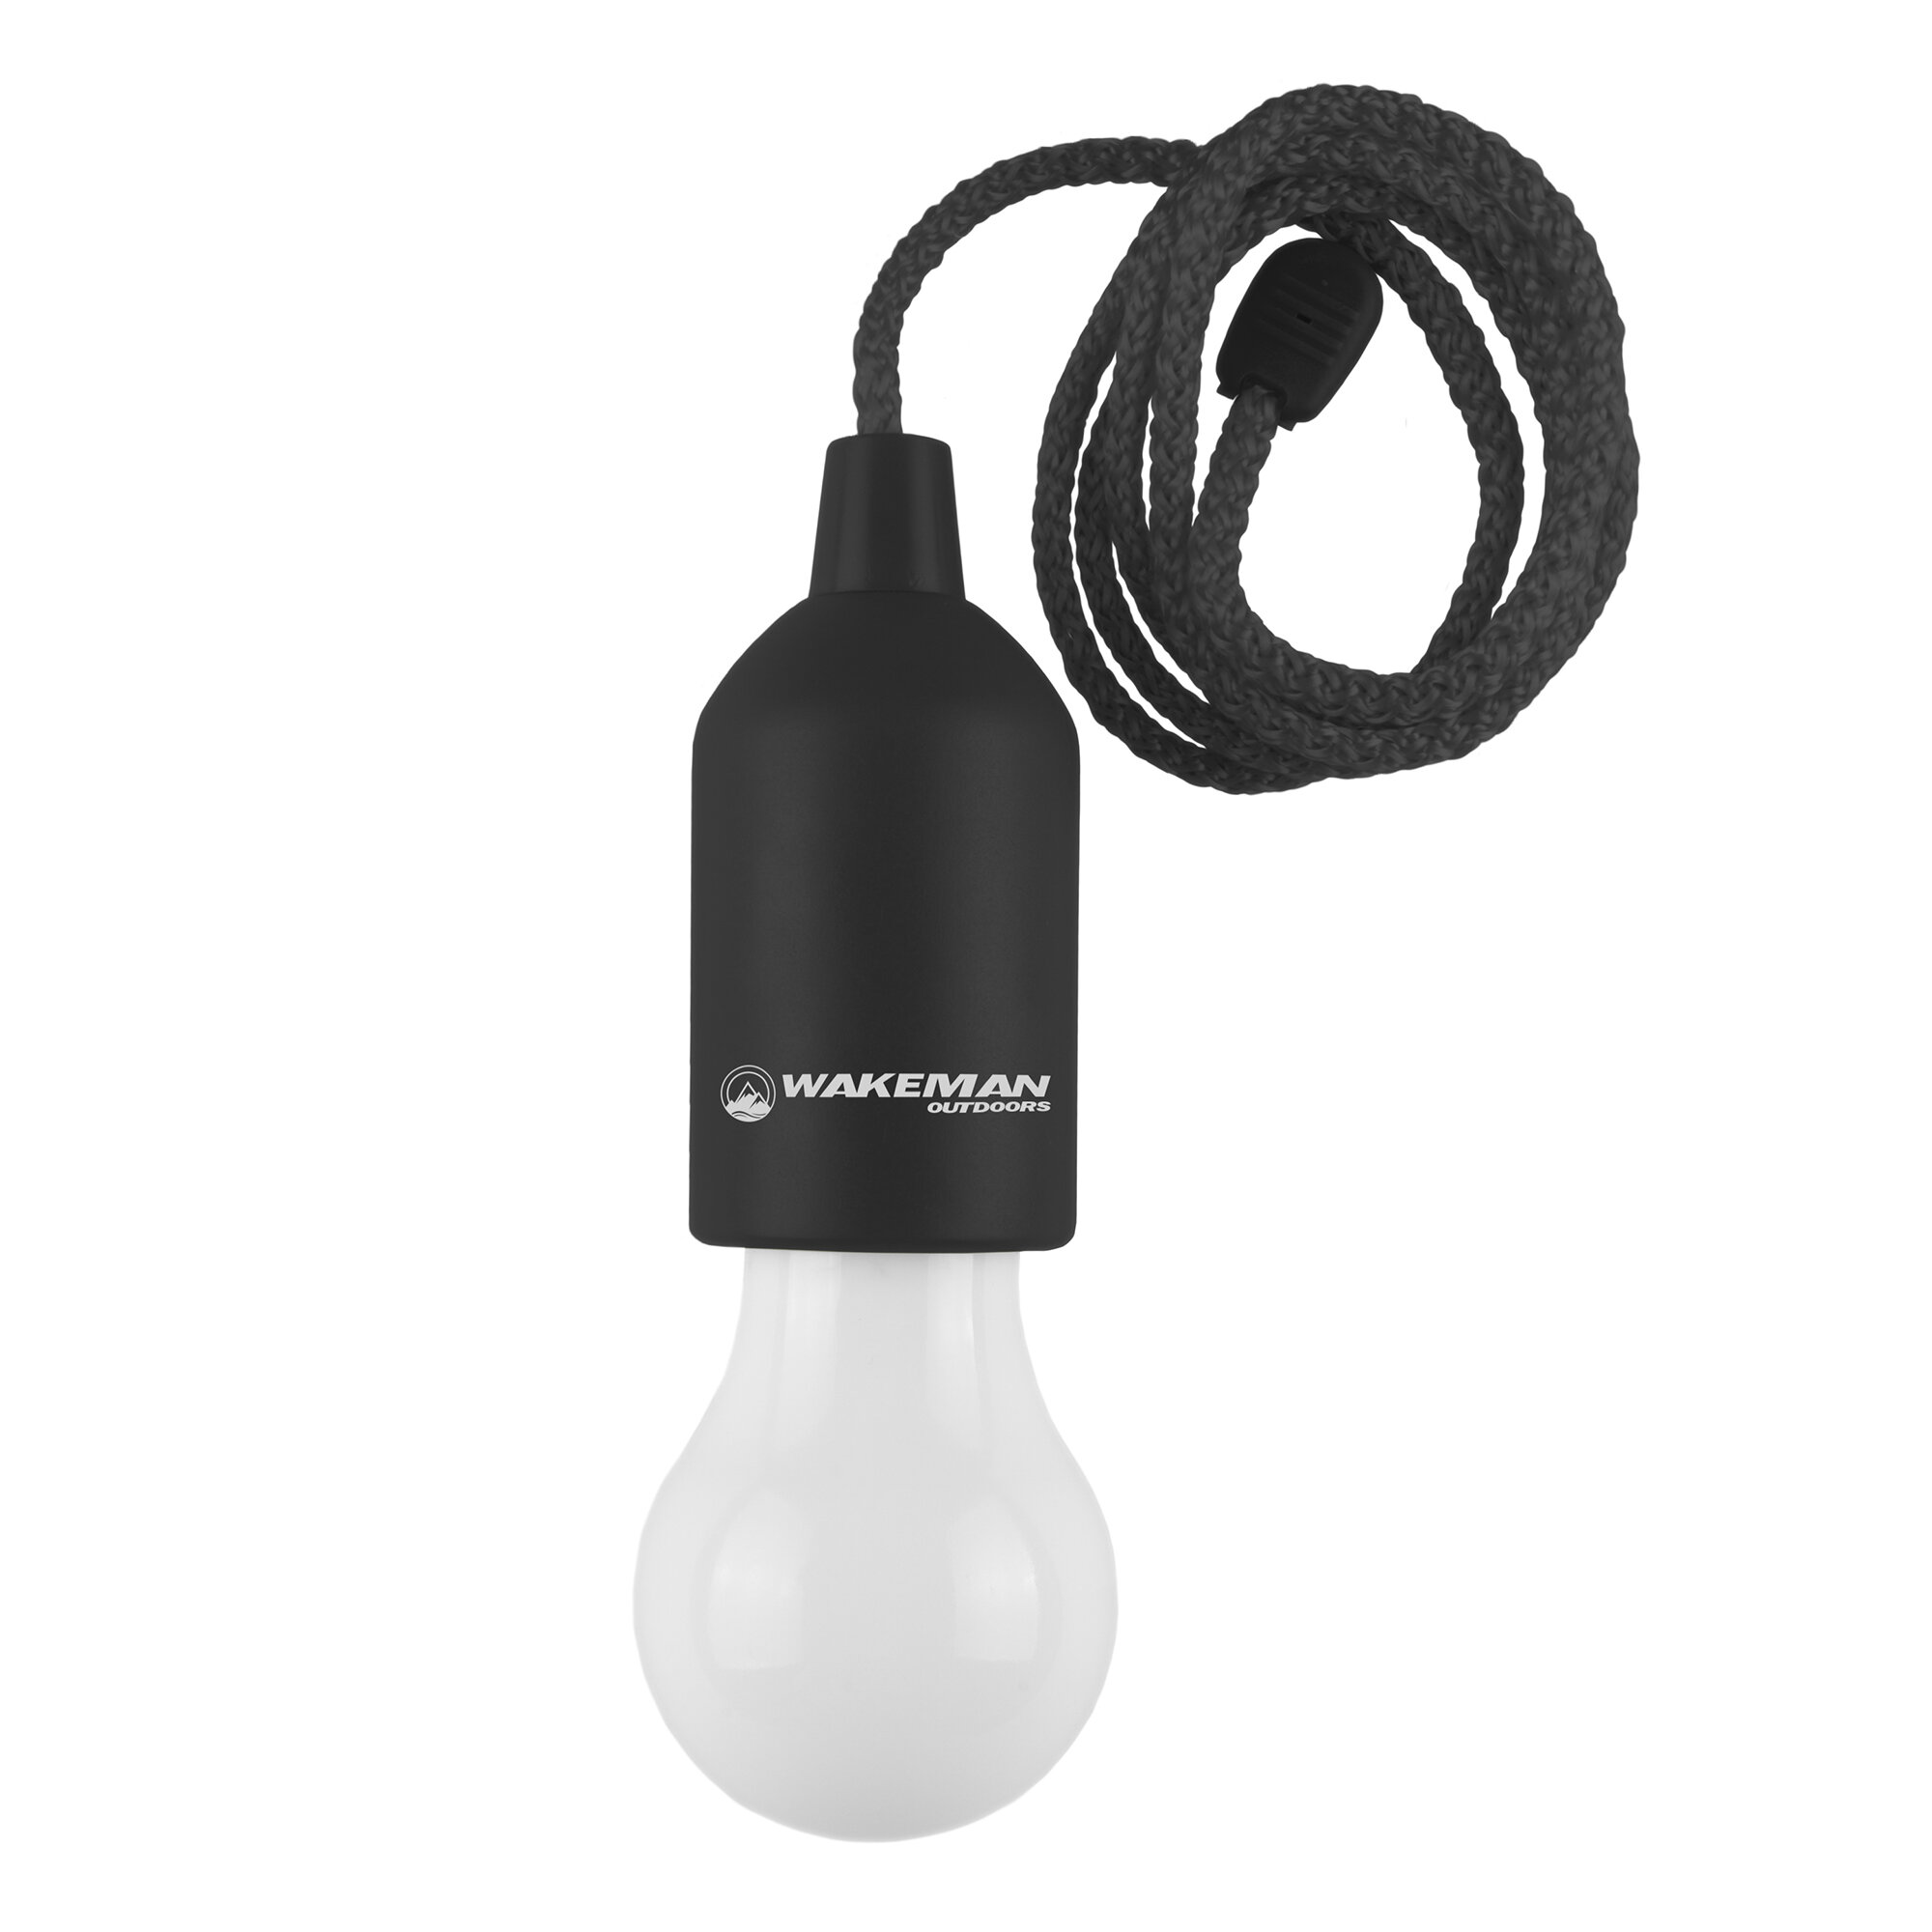 New 1 Watt Lightweight Hanging Bulb Style With Hook and Karabiner For Camping 